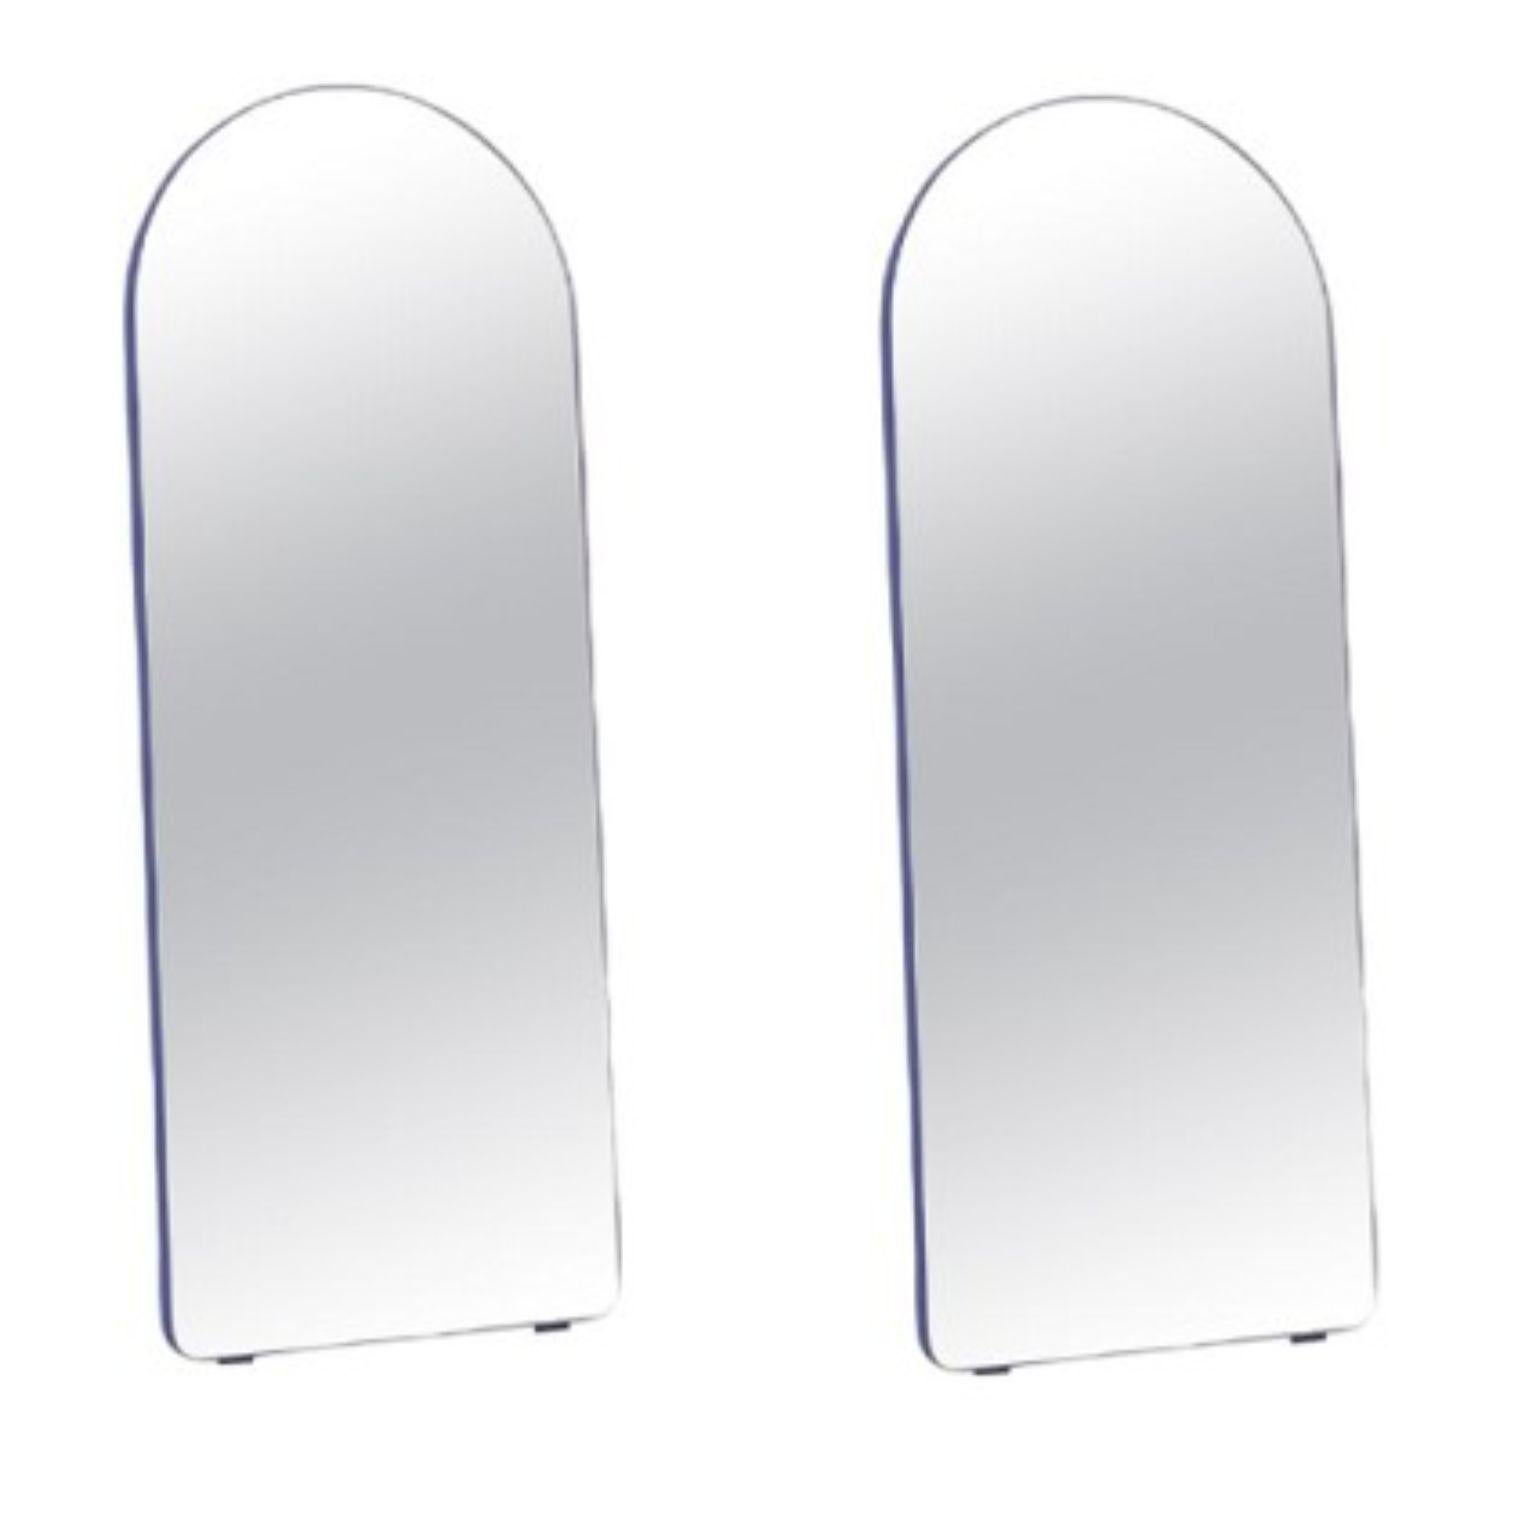 Set of 2 loveself 01 mirrors by Oito
Dimensions: D 70 x W 4 x H 180 cm
Materials: peinting mdf, silver glass mirror

Loveself is a collection of mirrors created by our team of designers oito design. The mission of our collection is to call